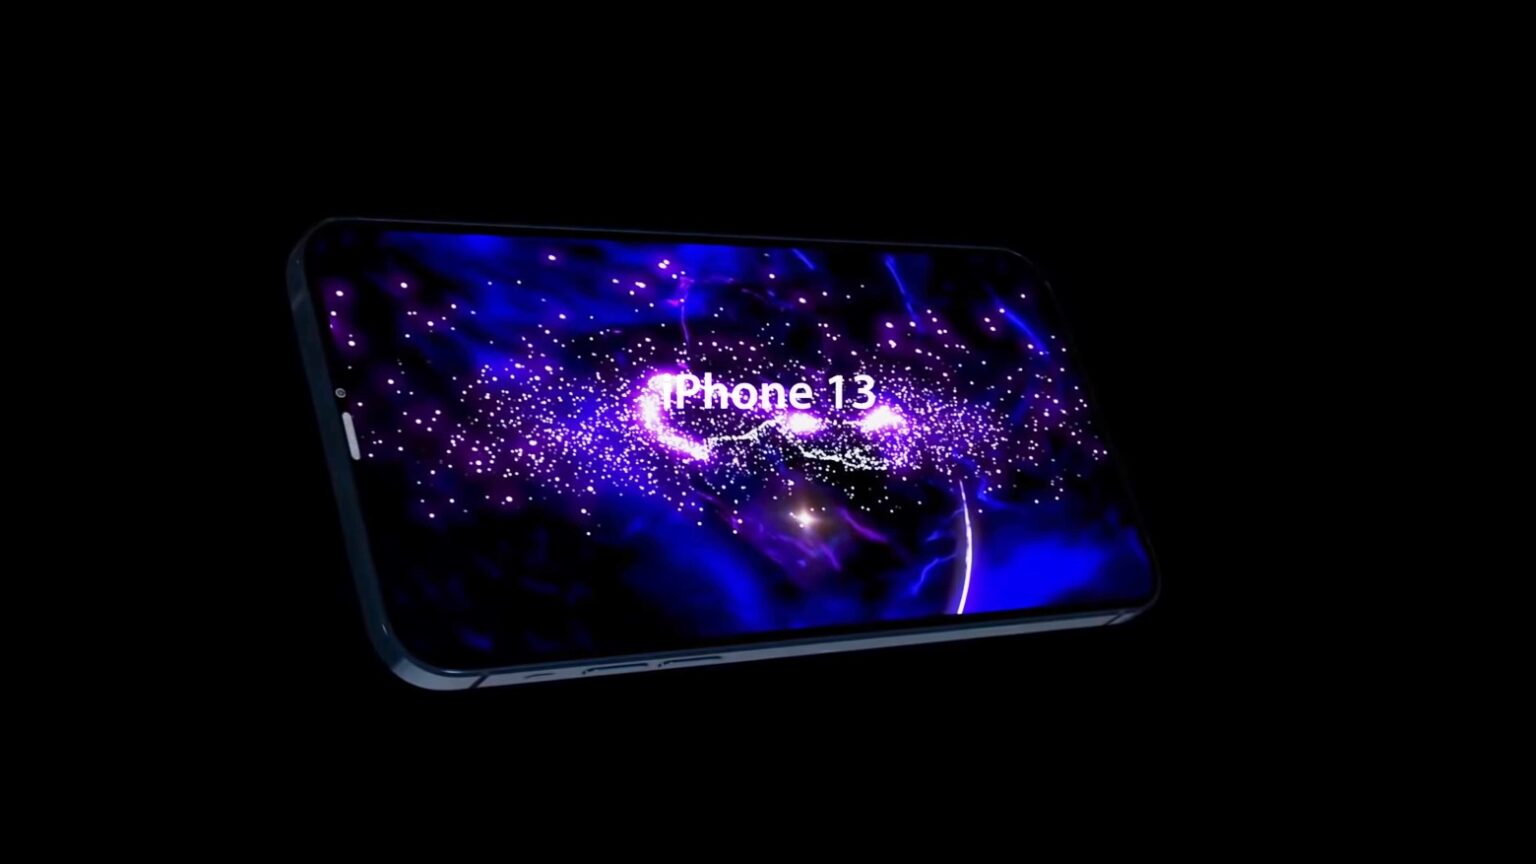 iPhone 13 might sport a 120Hz display.